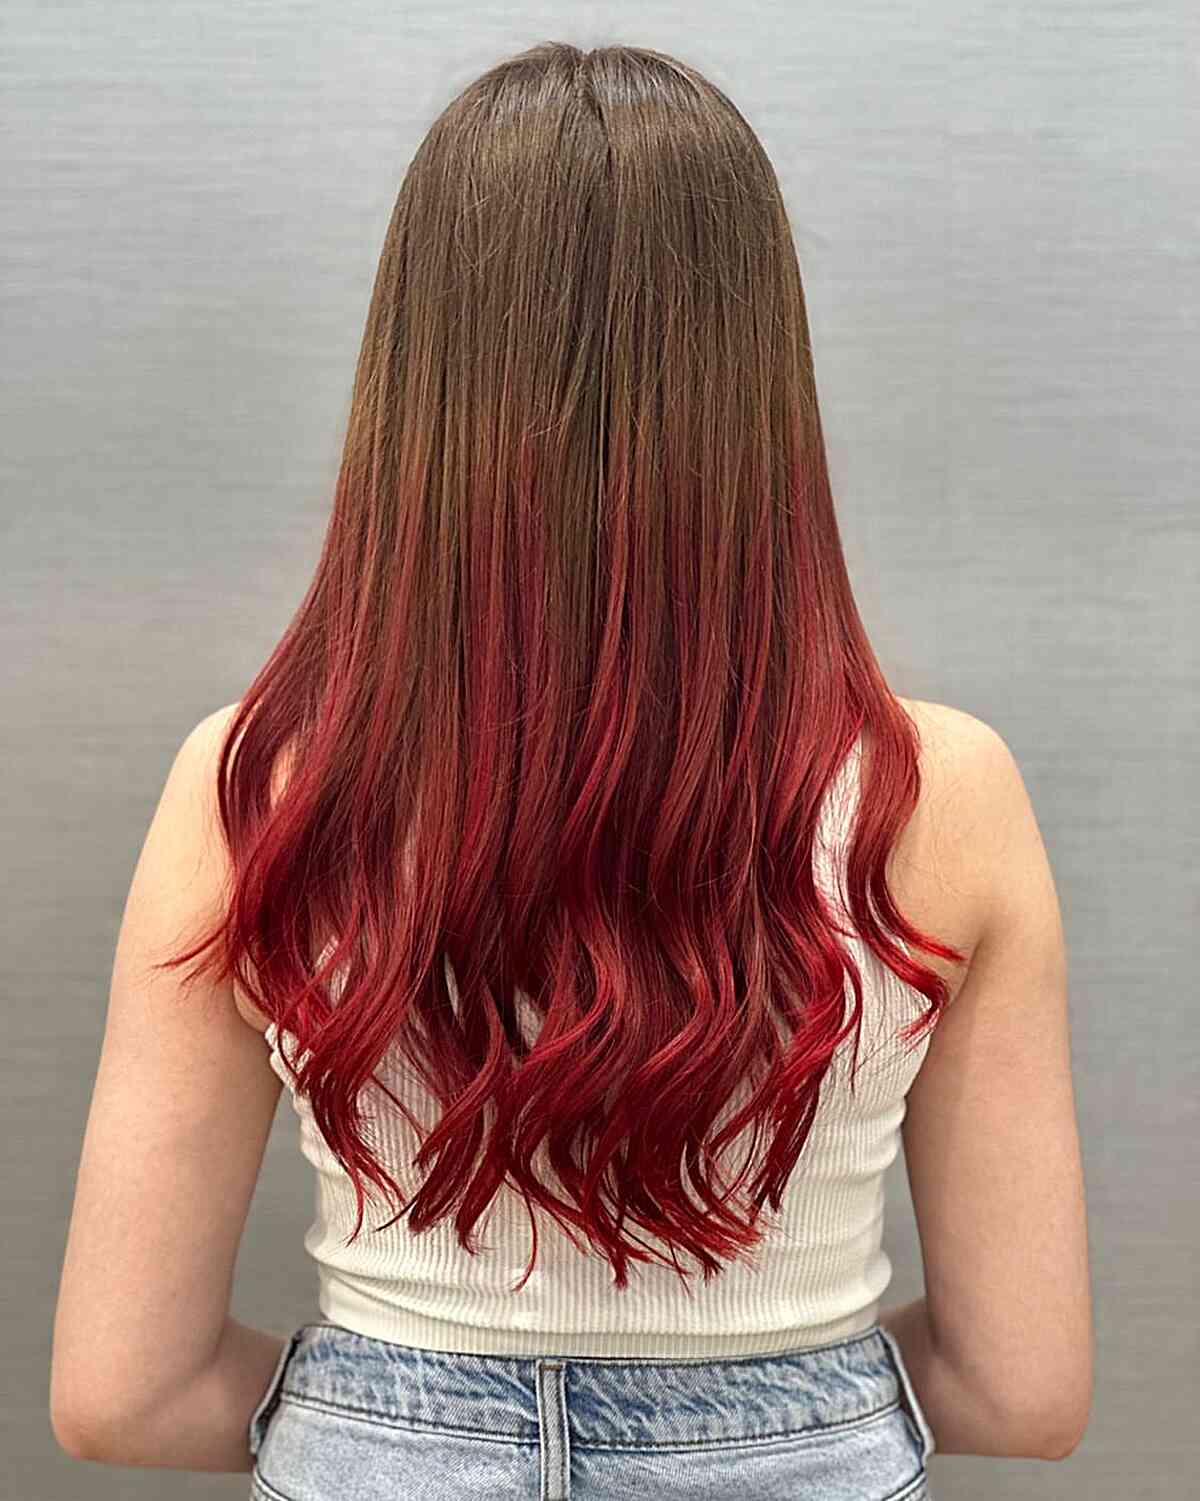 Shade of Strawberry Blonde to Red Reverse Ombre